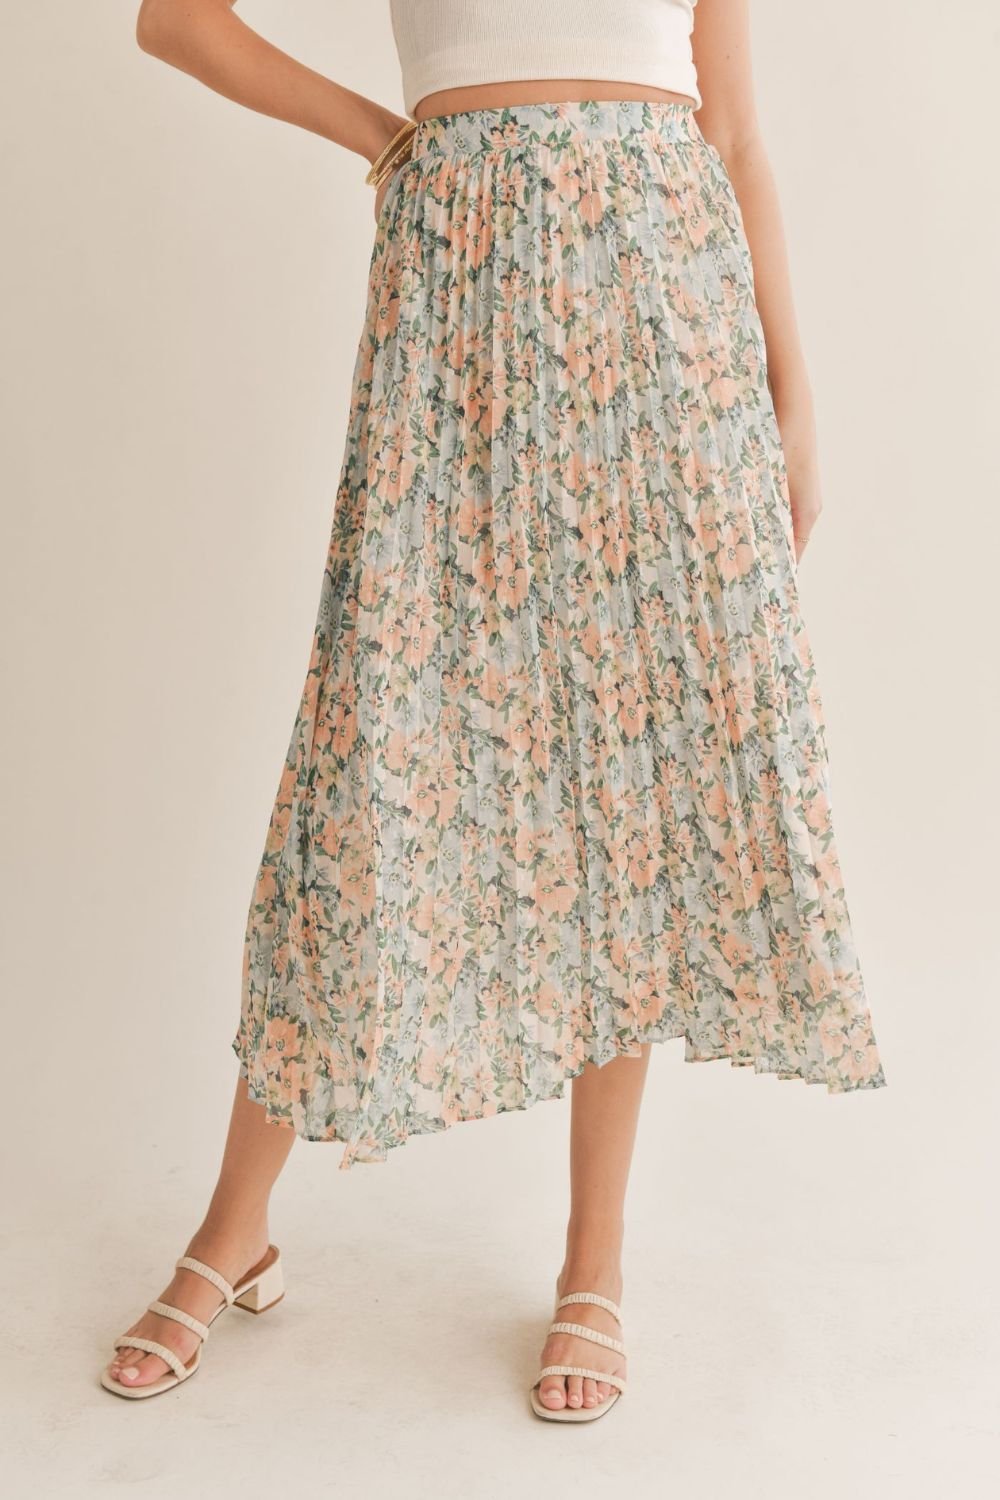 Women's Floral Swiss Dot Pleated Midi Skirt | Blue Multi - Women's Skirts - Blooming Daily